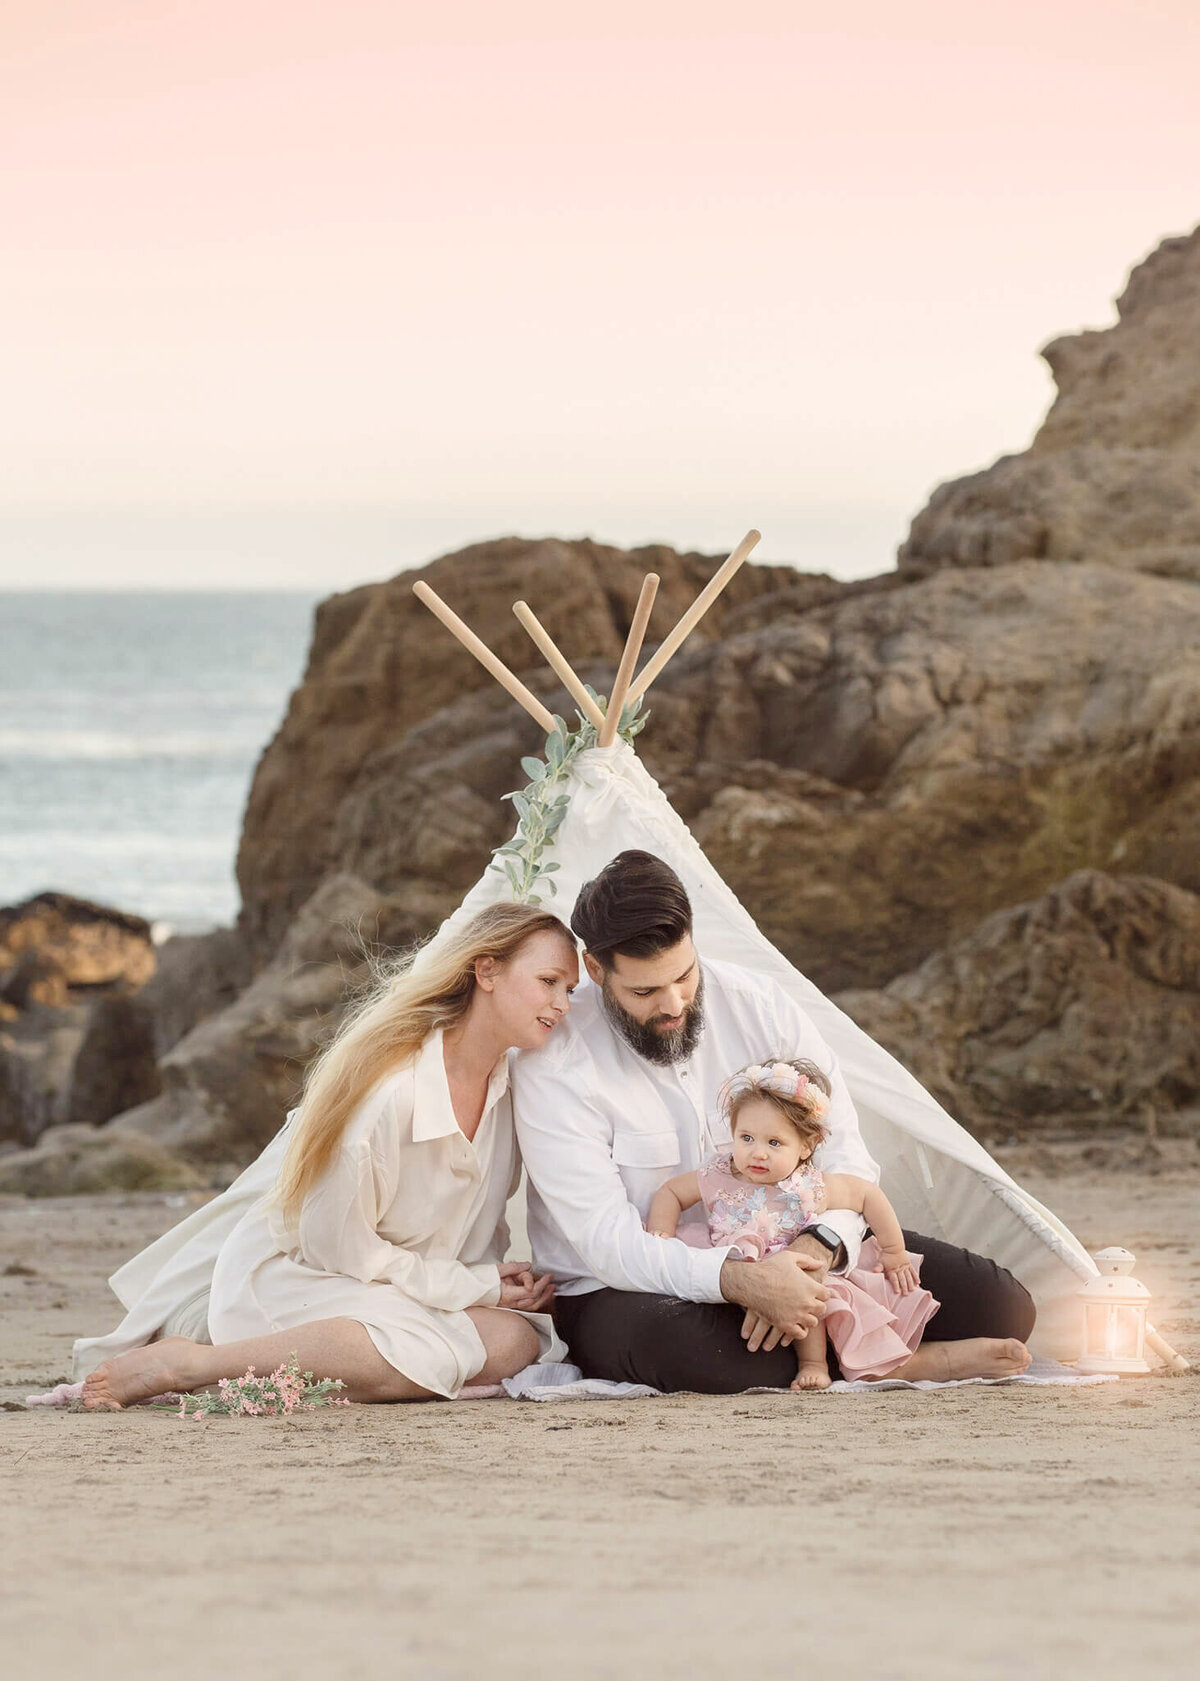 Mom and dad with their toddler daughter photographed in Malibu while sitting in a tent